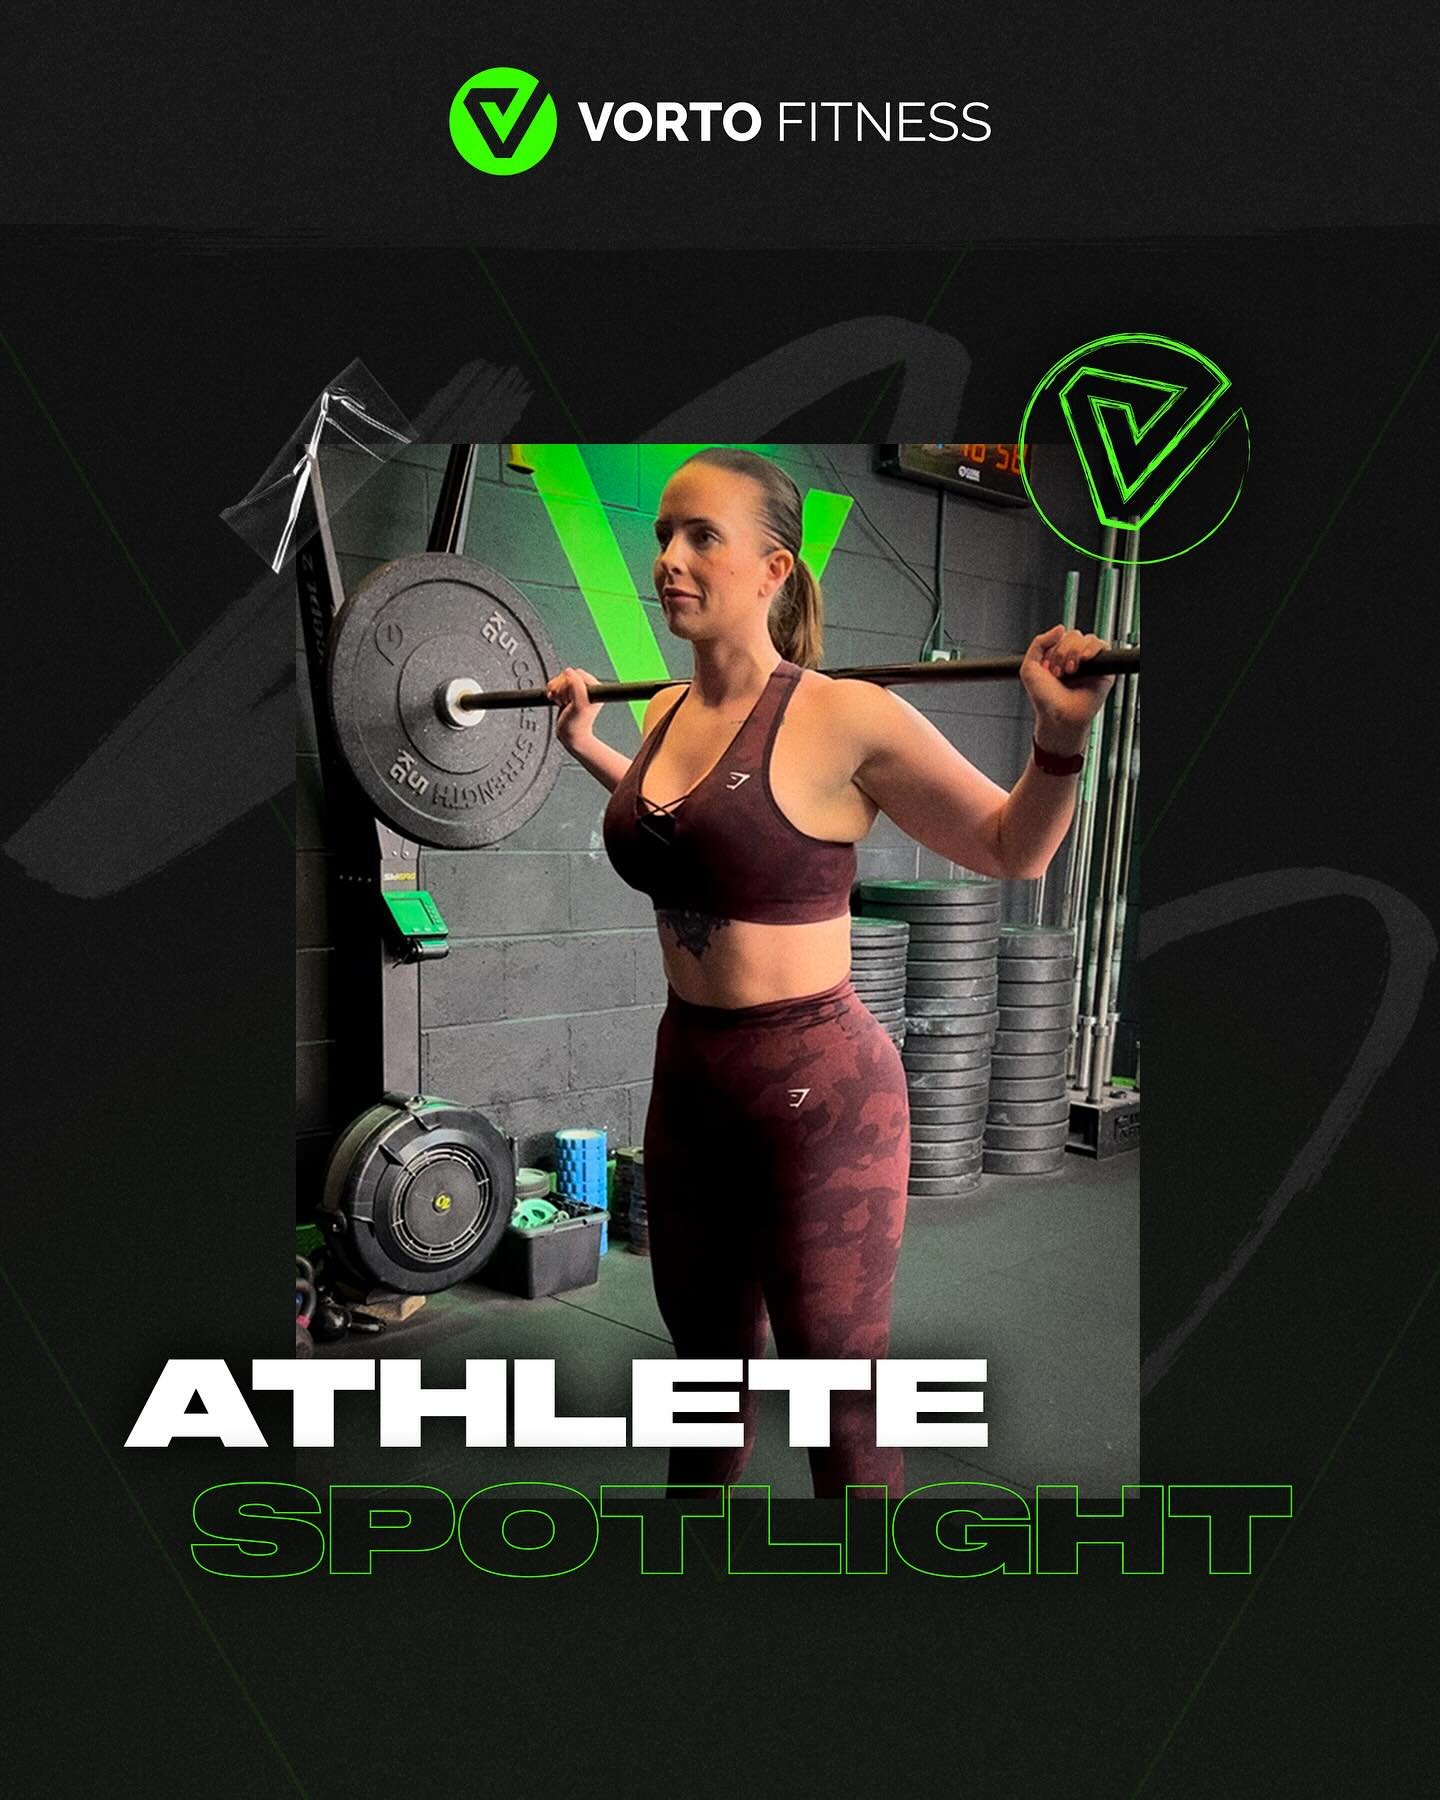 Our April member of the month goes out to @_leigh_14 🤩!

There is no doubt about it, that Leigh continues to be one of the most consistent members in the gym. Showing up daily and putting in the hard work both in classes, and also in her own trainin